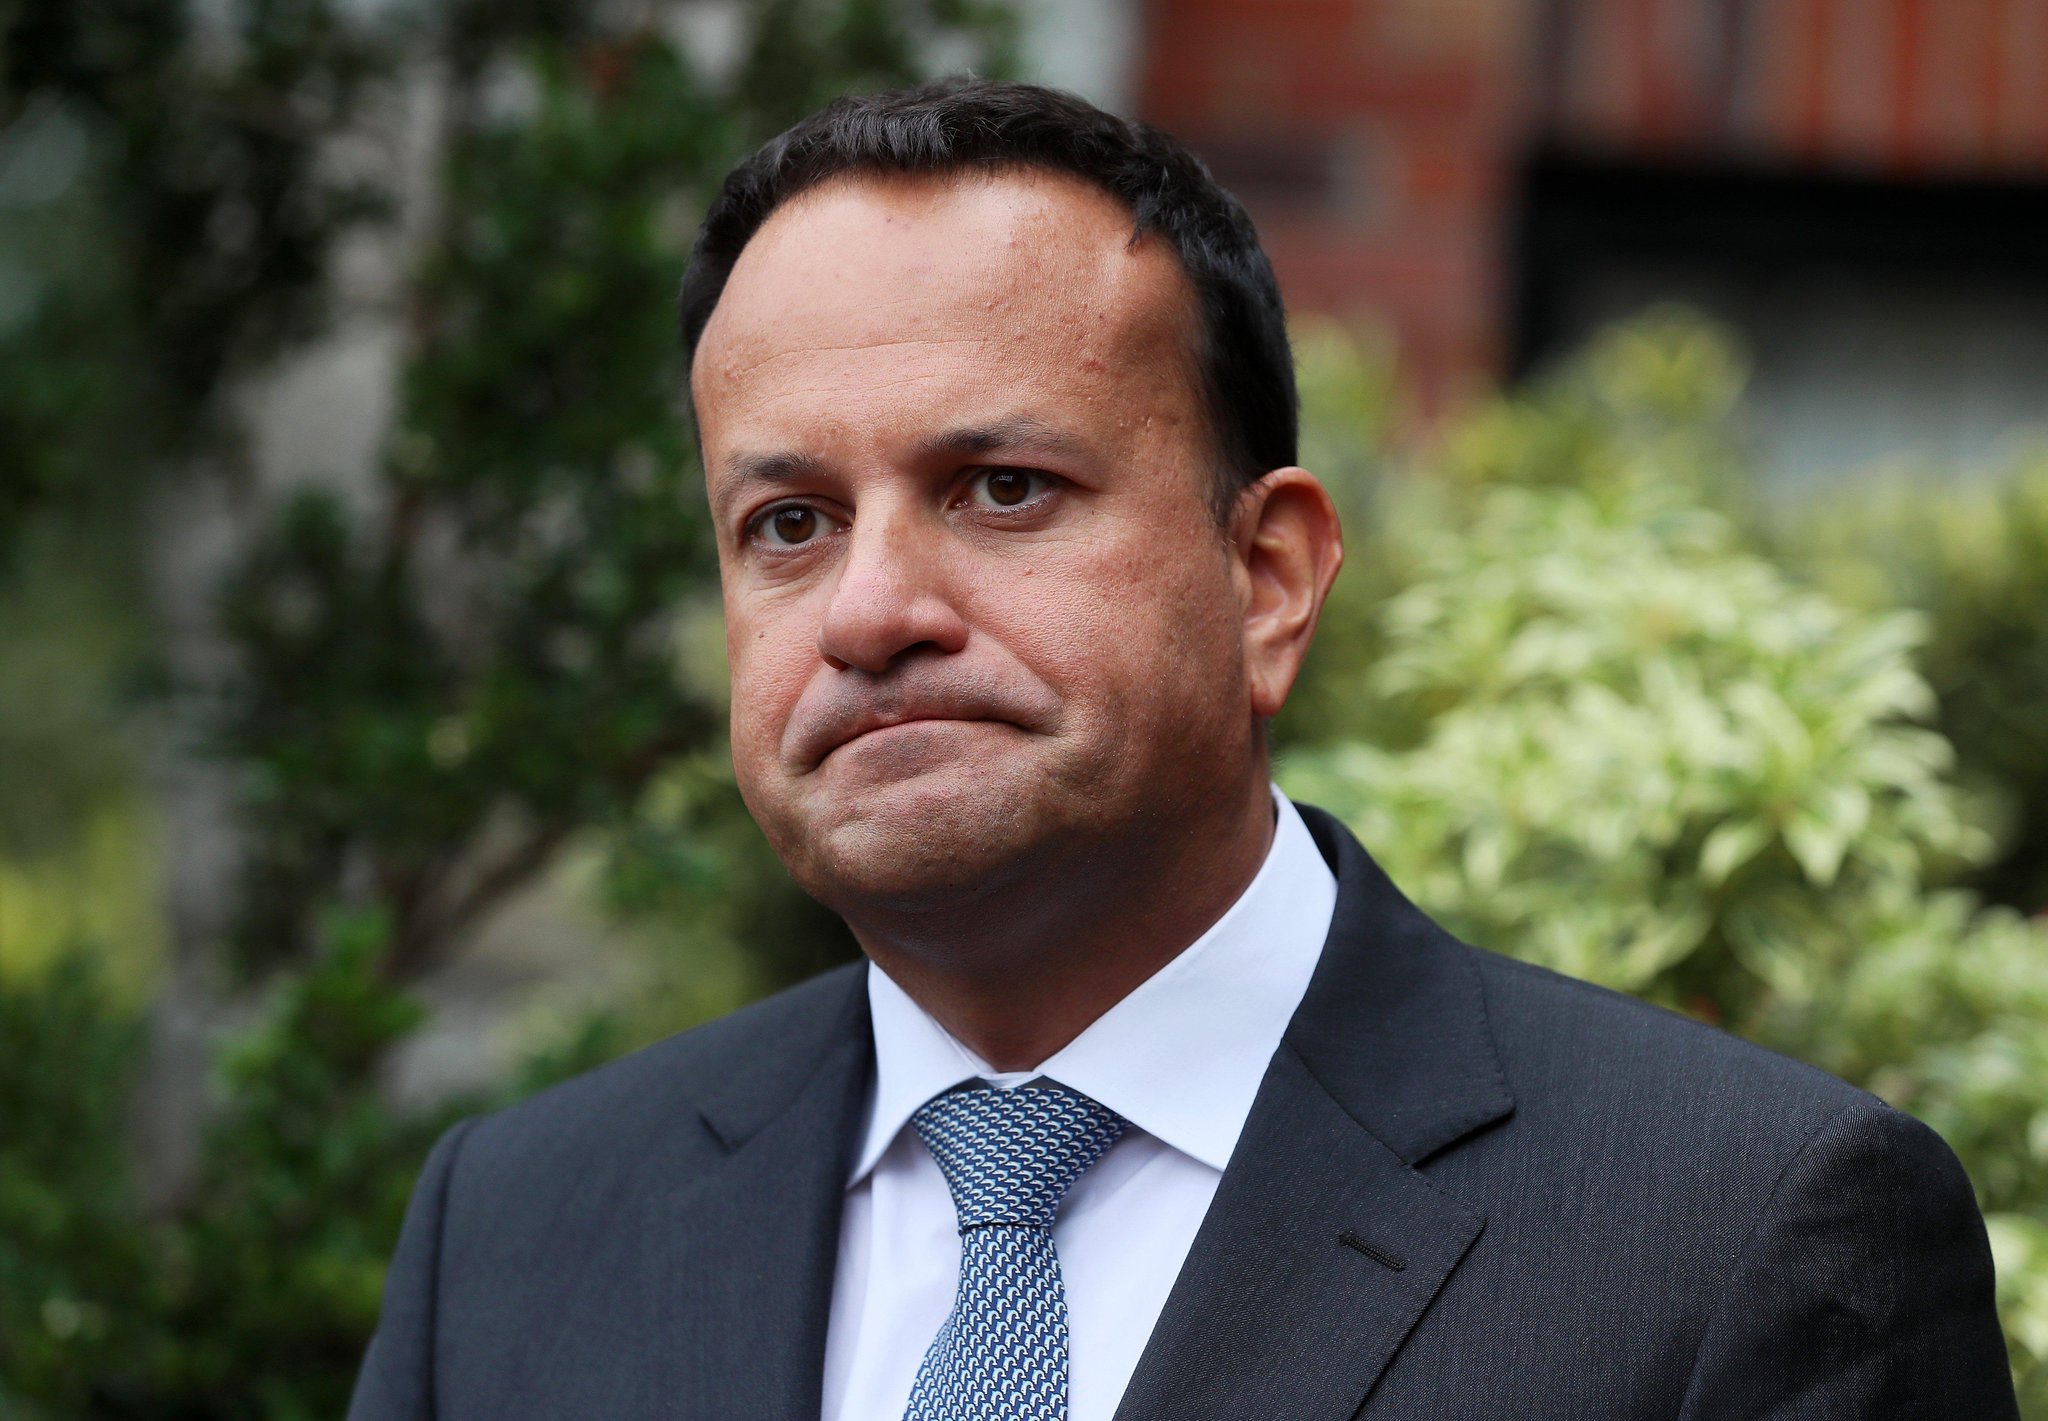 Political relationships 'not where they should be', Leo Varadkar tells summit